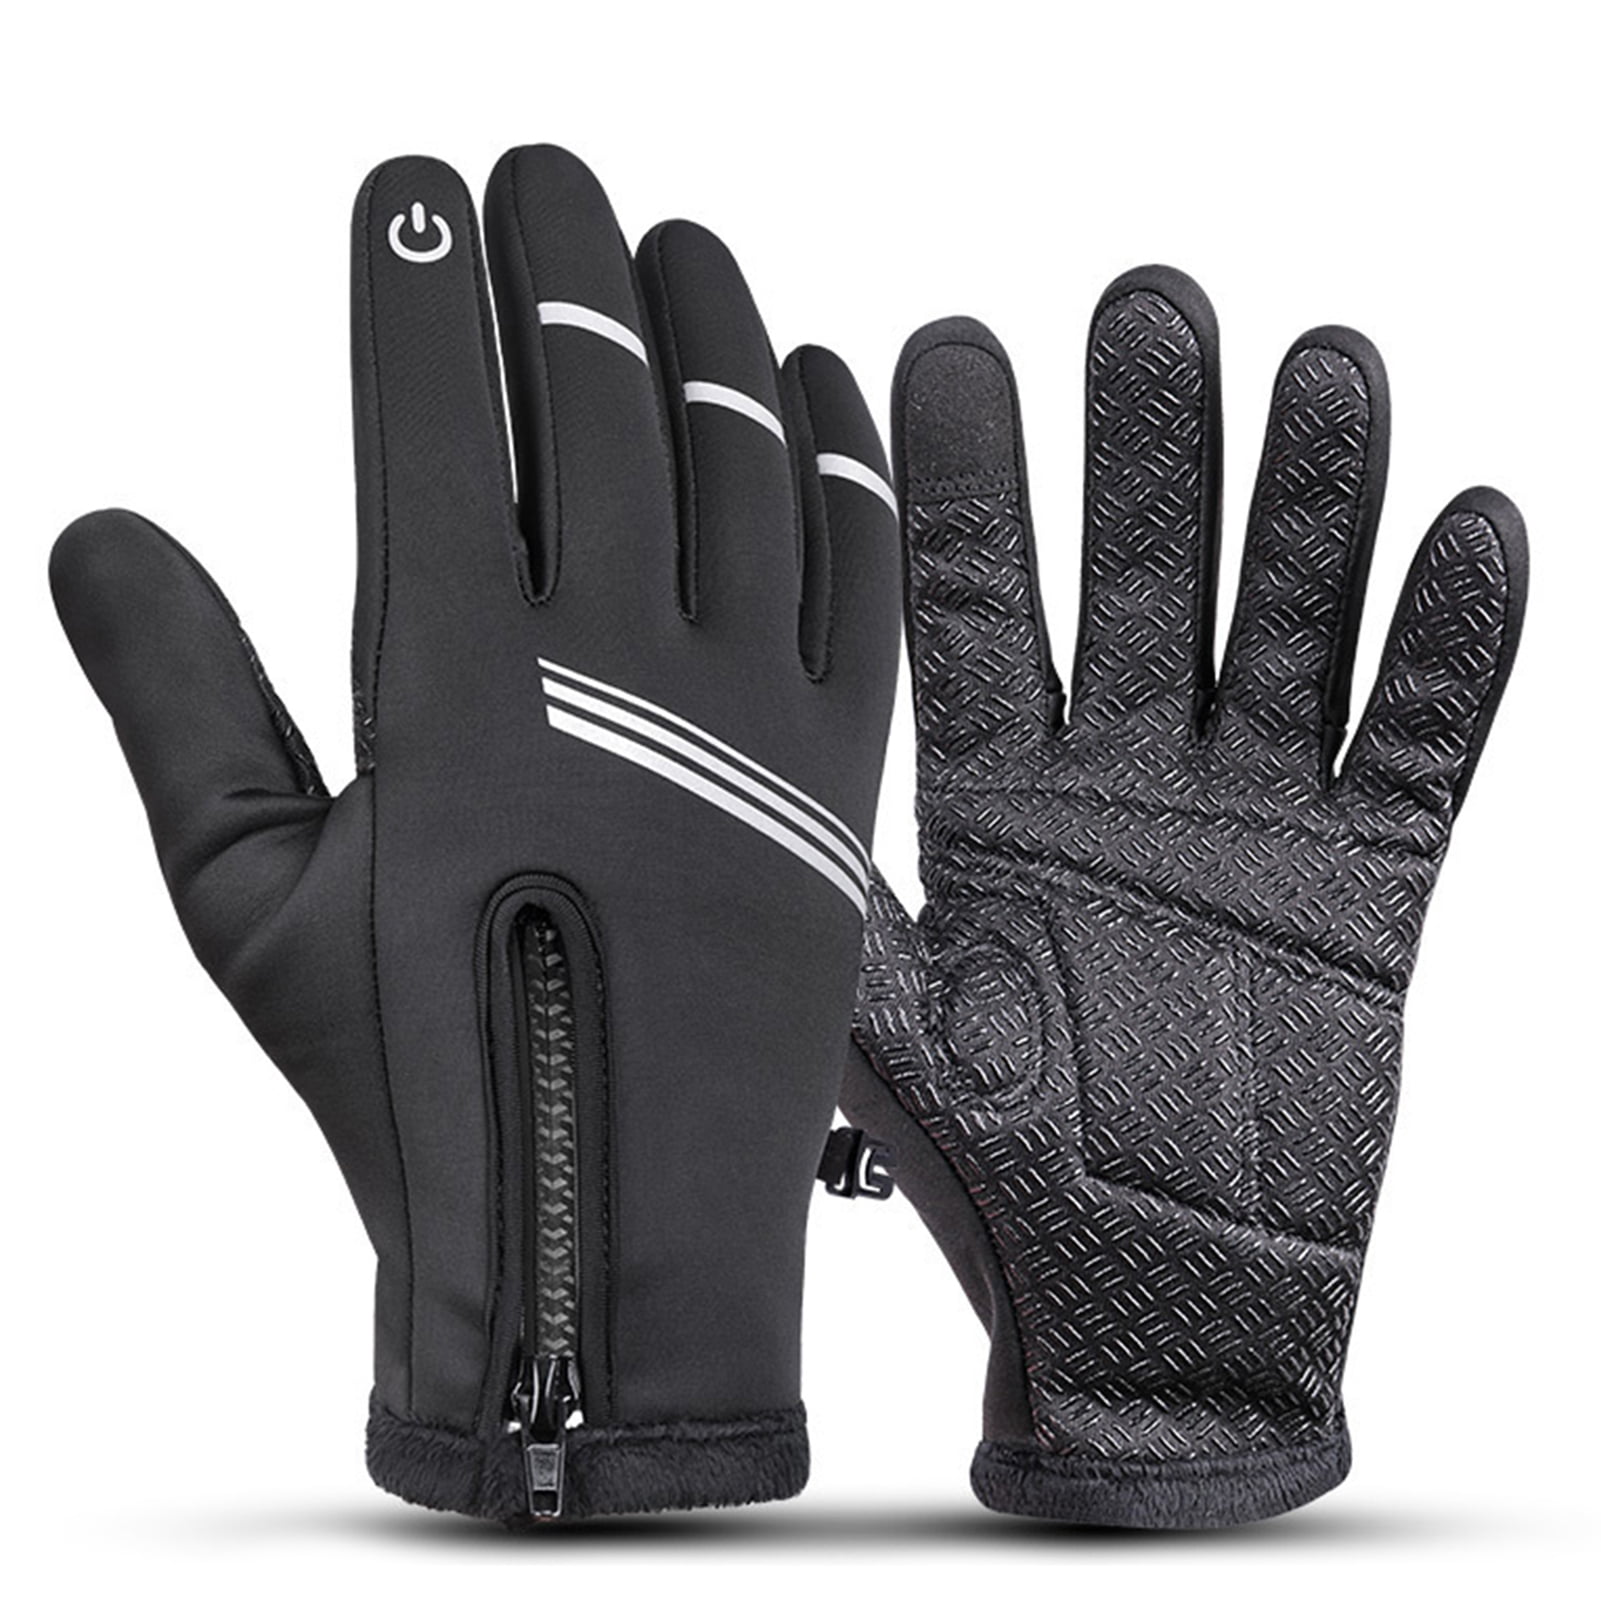 Details about   Full Finger Gloves Touch Screen GEL Cycling Waterproof Unisex Sports Shockproof